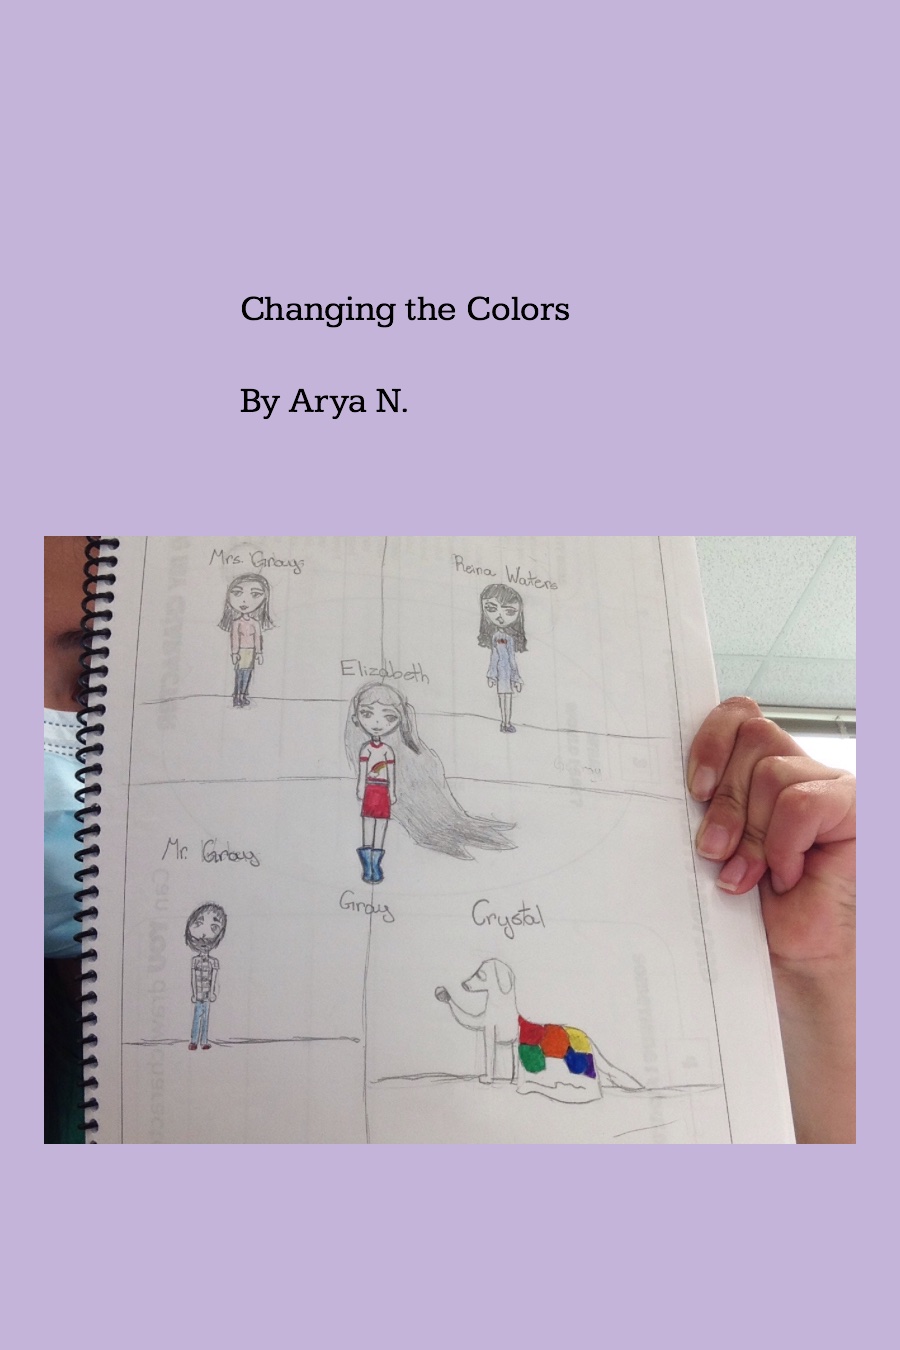 Changing the Colors by Arya N